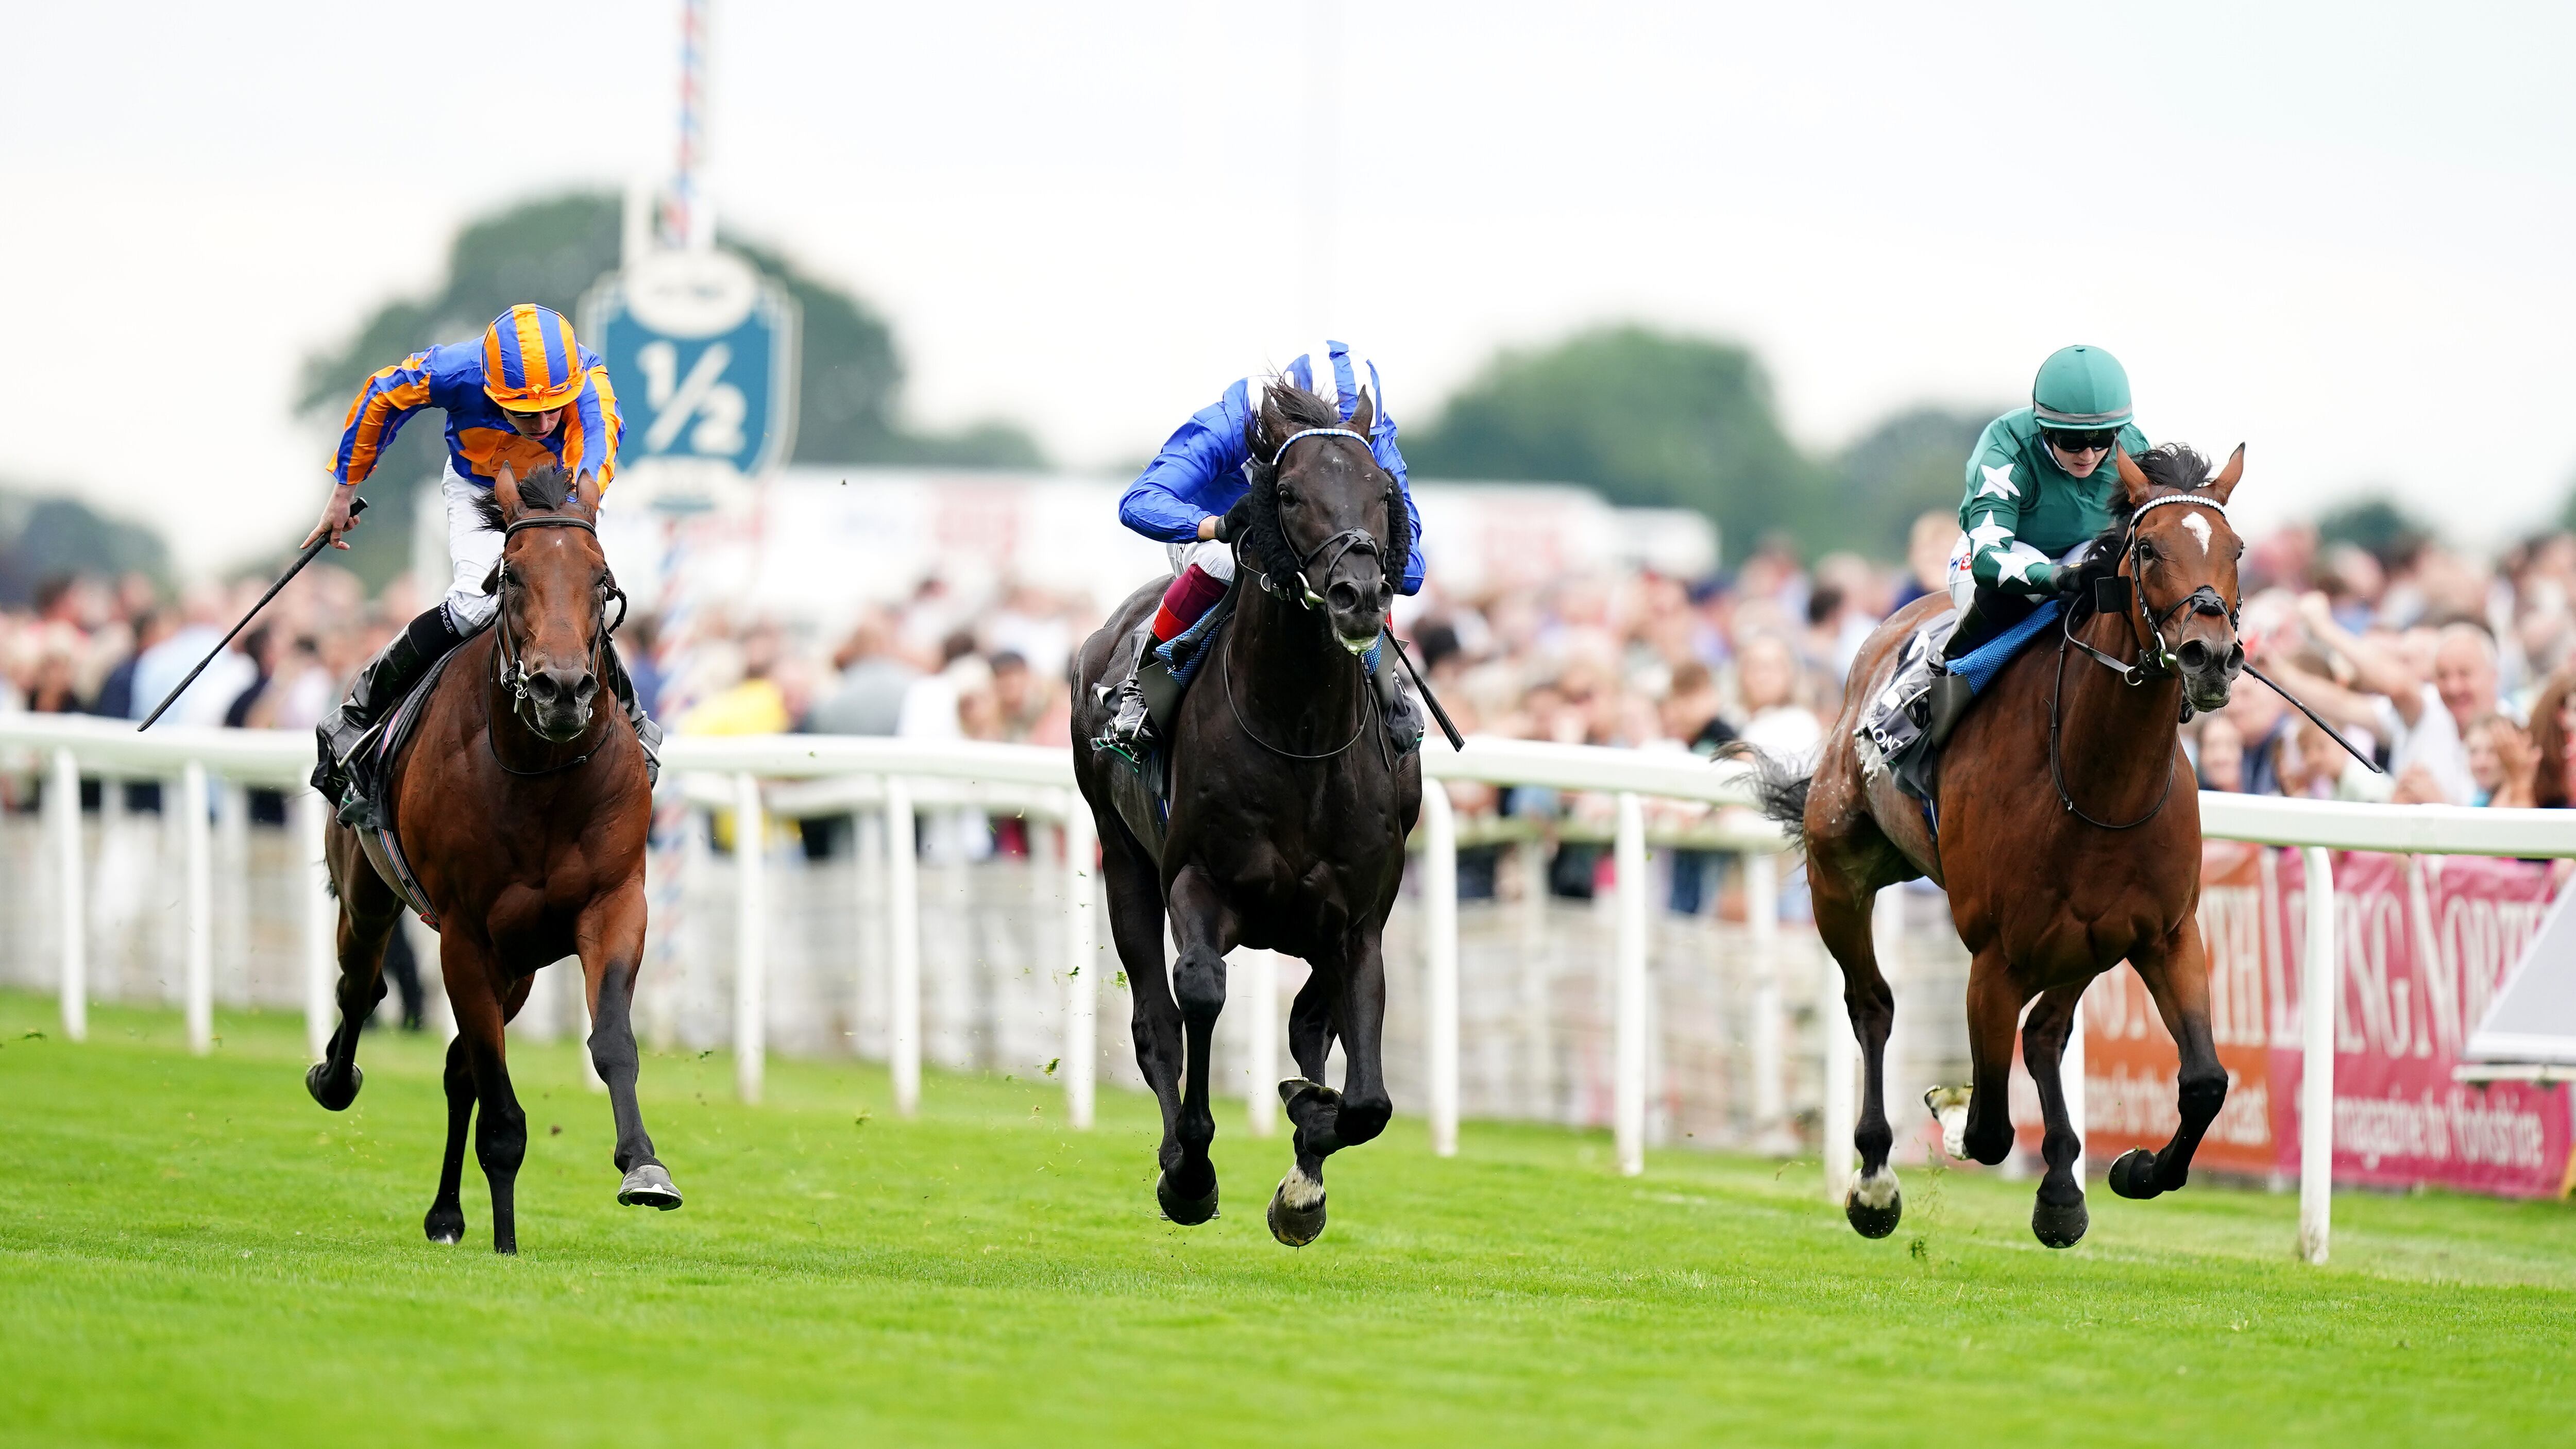 Mostahdaf, ridden by Frankie Dettori (centre), wins the Juddmonte International Stakes with Nashwa, under Hollie Doyle (right) second and Paddington, ridden by Ryan Moore, third on day one of the Sky Bet Ebor Festival at York Racecourse. Picture by PA